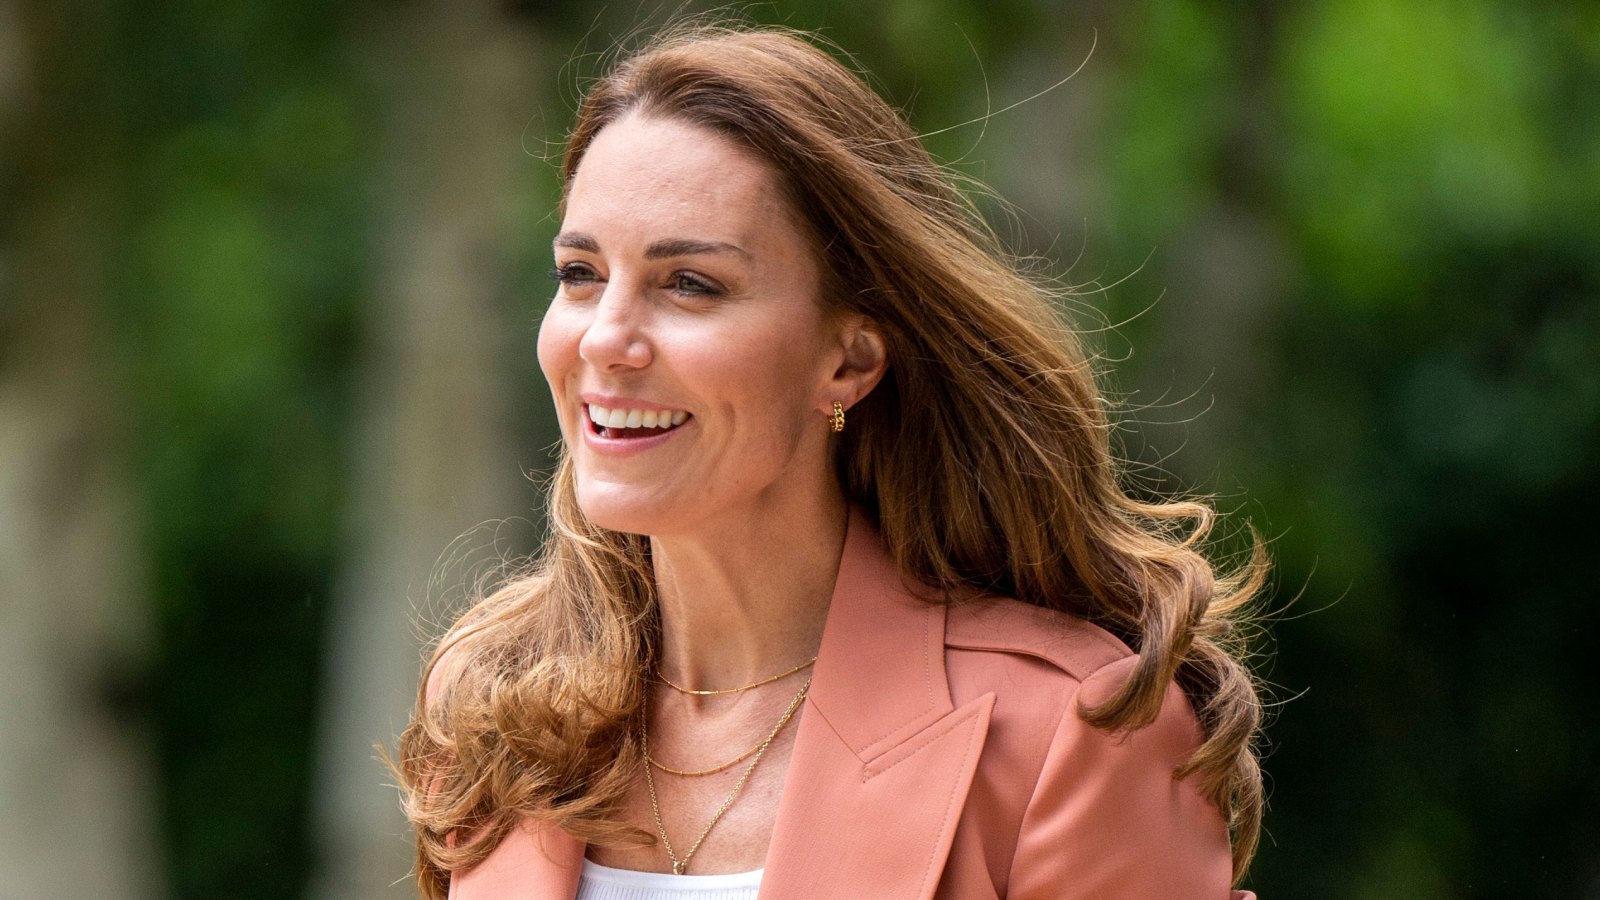 Duchess Kate of Cambridge visit to the Natural History Museum in London on June 22, 2021.